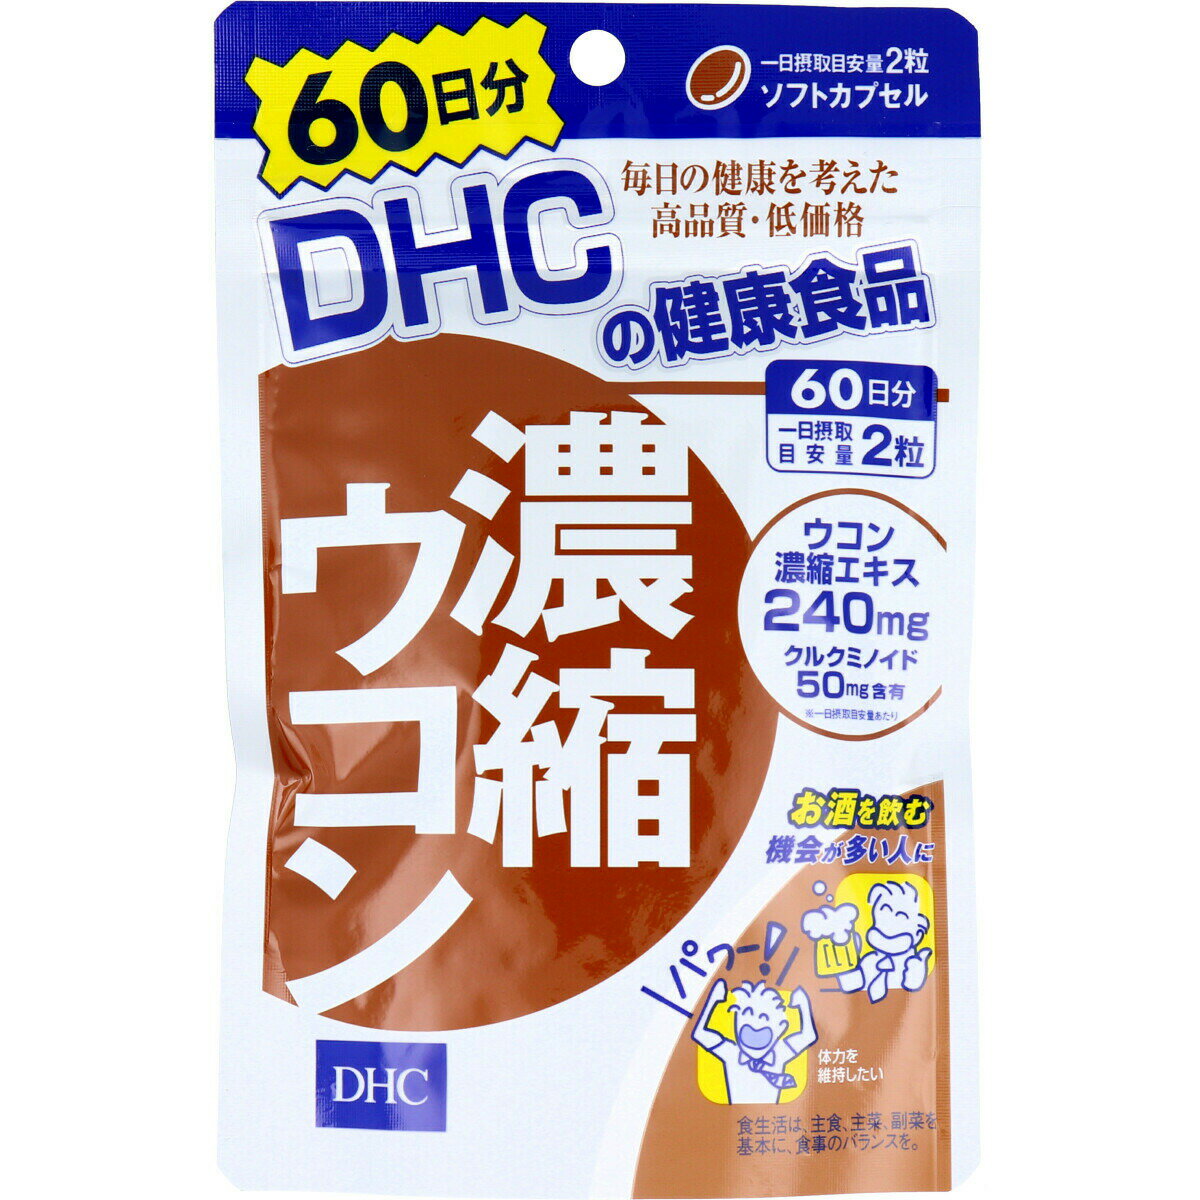 DHC　濃縮ウコン　120粒入　60日分